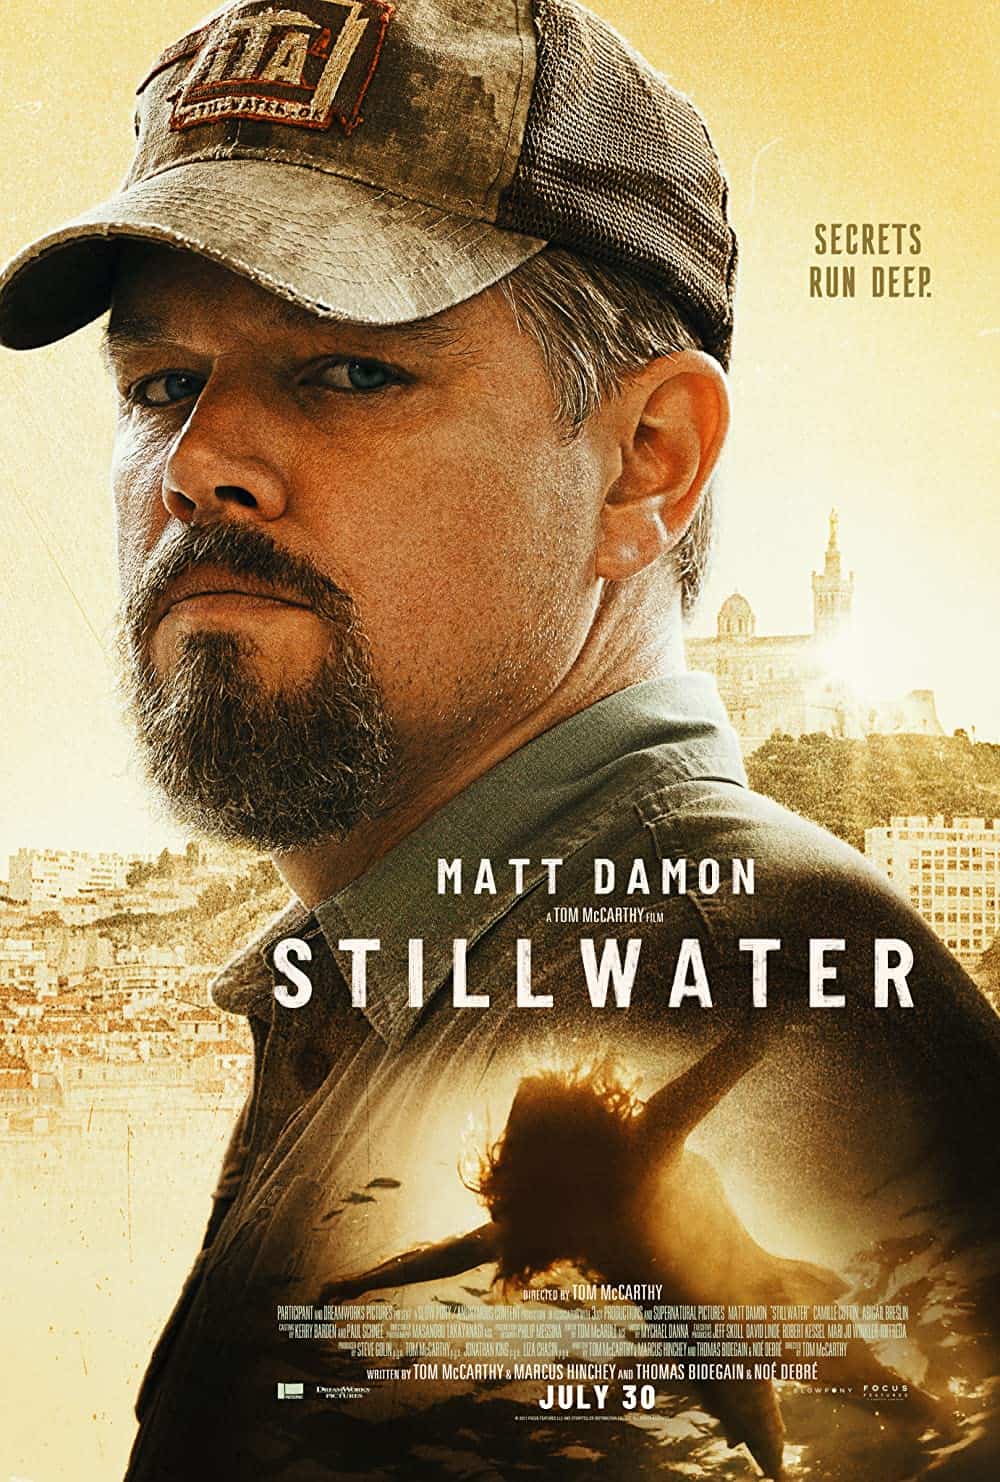 Official Poster for the Film, Stillwater (2021).